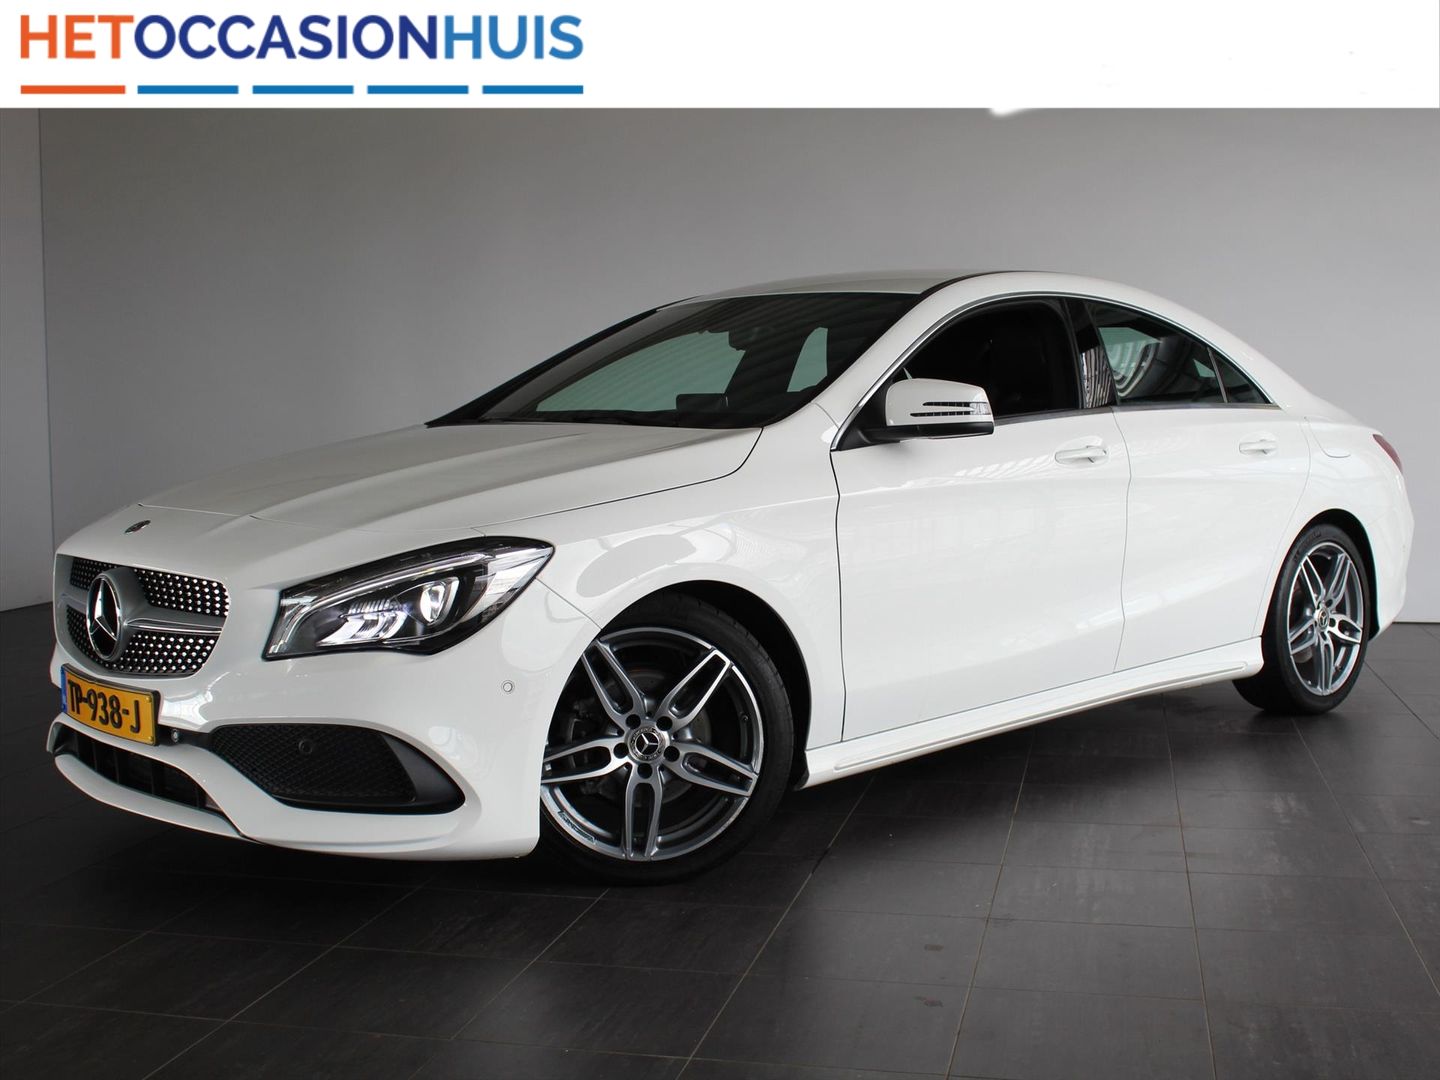 Mercedes-benz Cla 180 122pk 7g-dct business solution amg upgrade edition